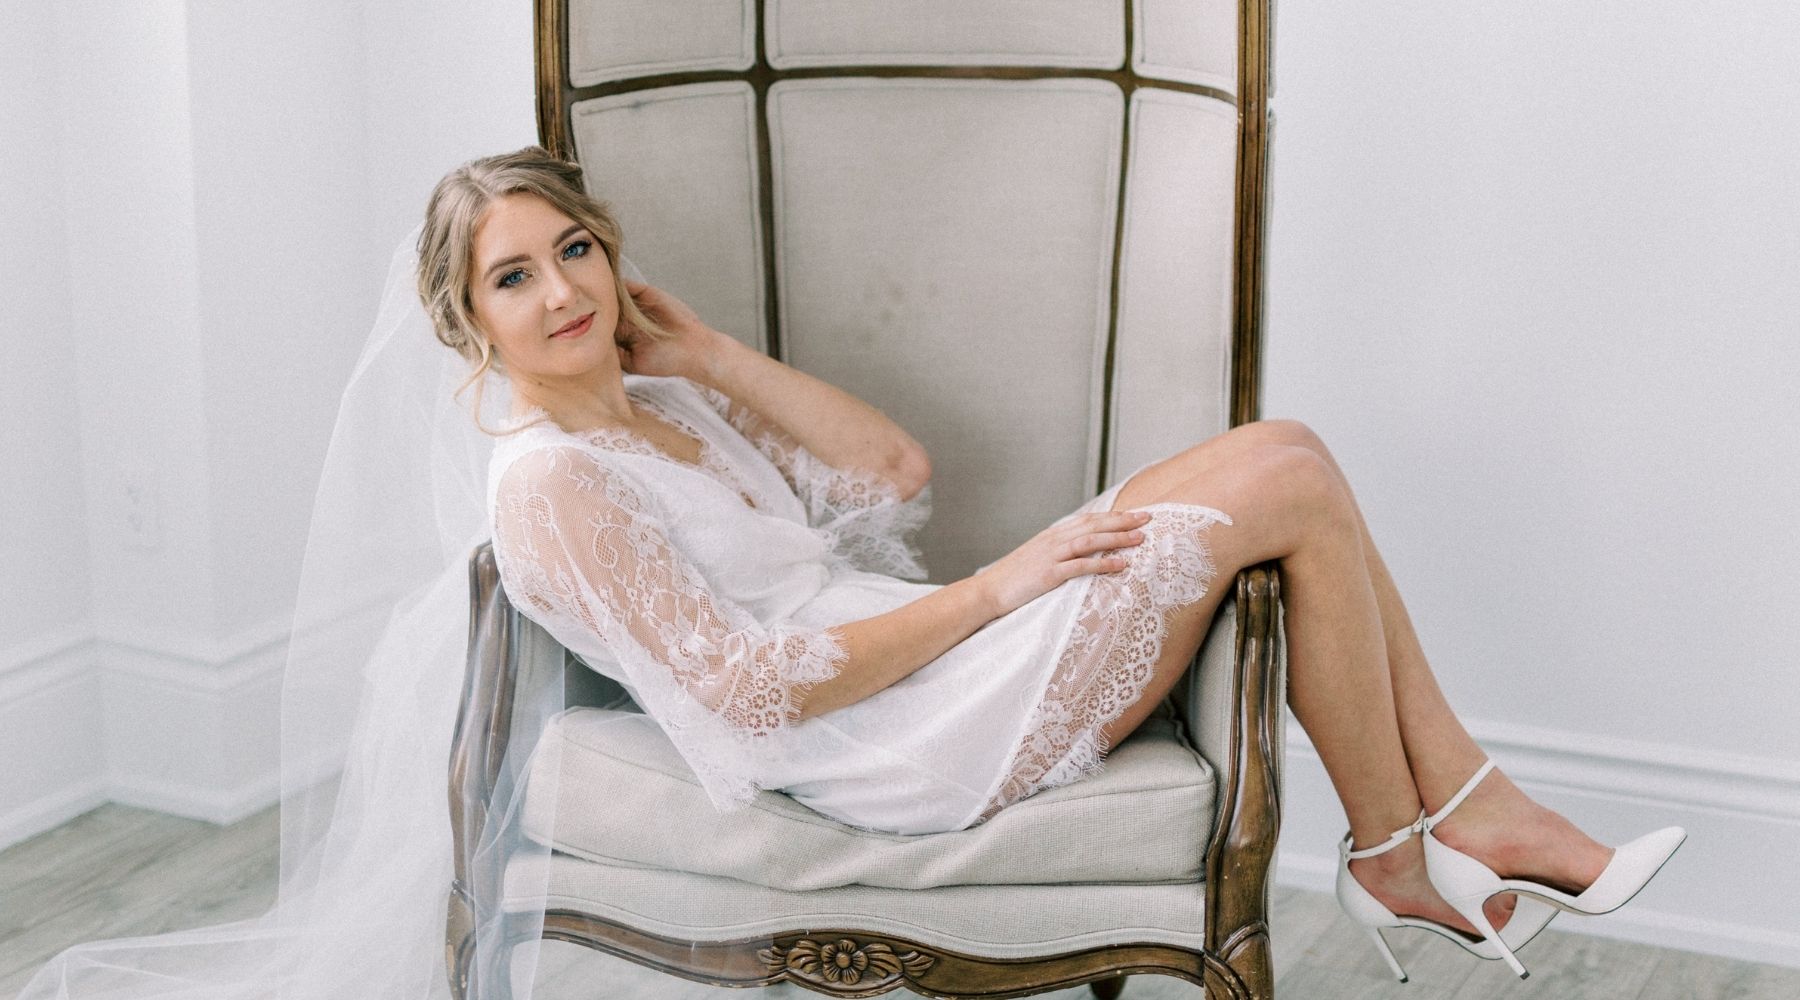 Found my dress! Any good brands of spanx I could I get so it still looks  nude under the lace? : r/weddingdress